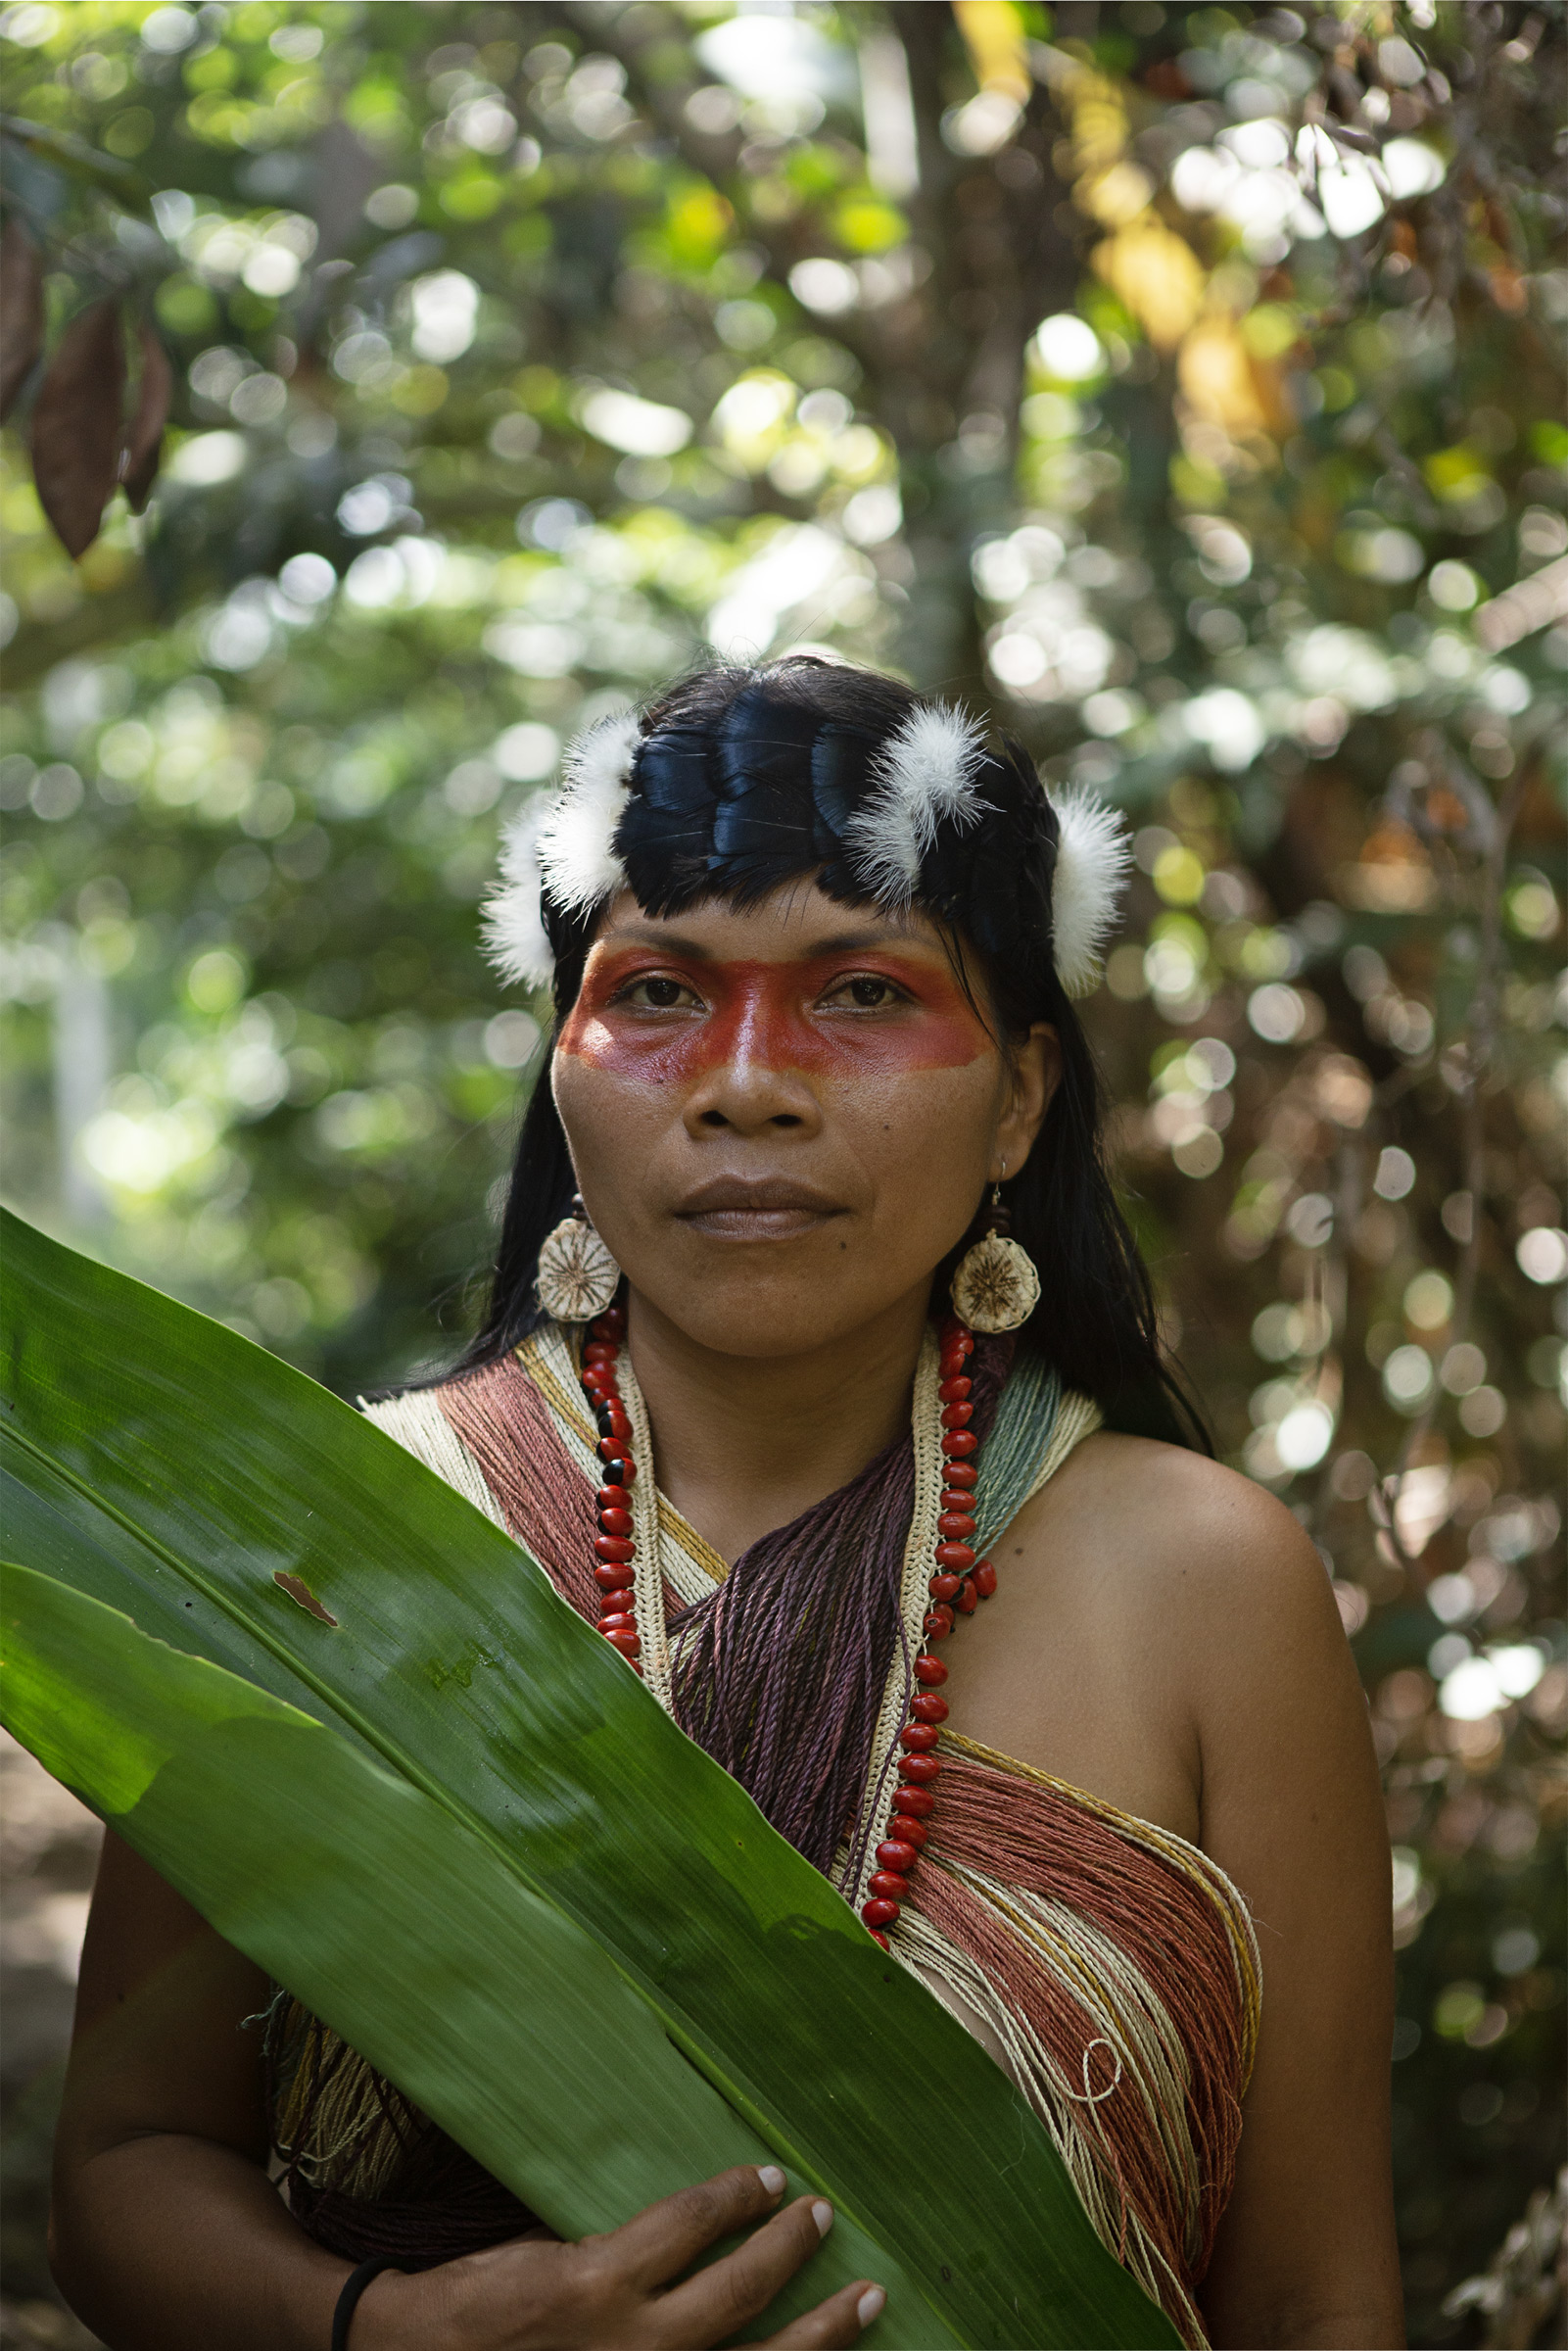 Nemonte Nenquimo on Respecting the Amazon and What is Owed to the Planet